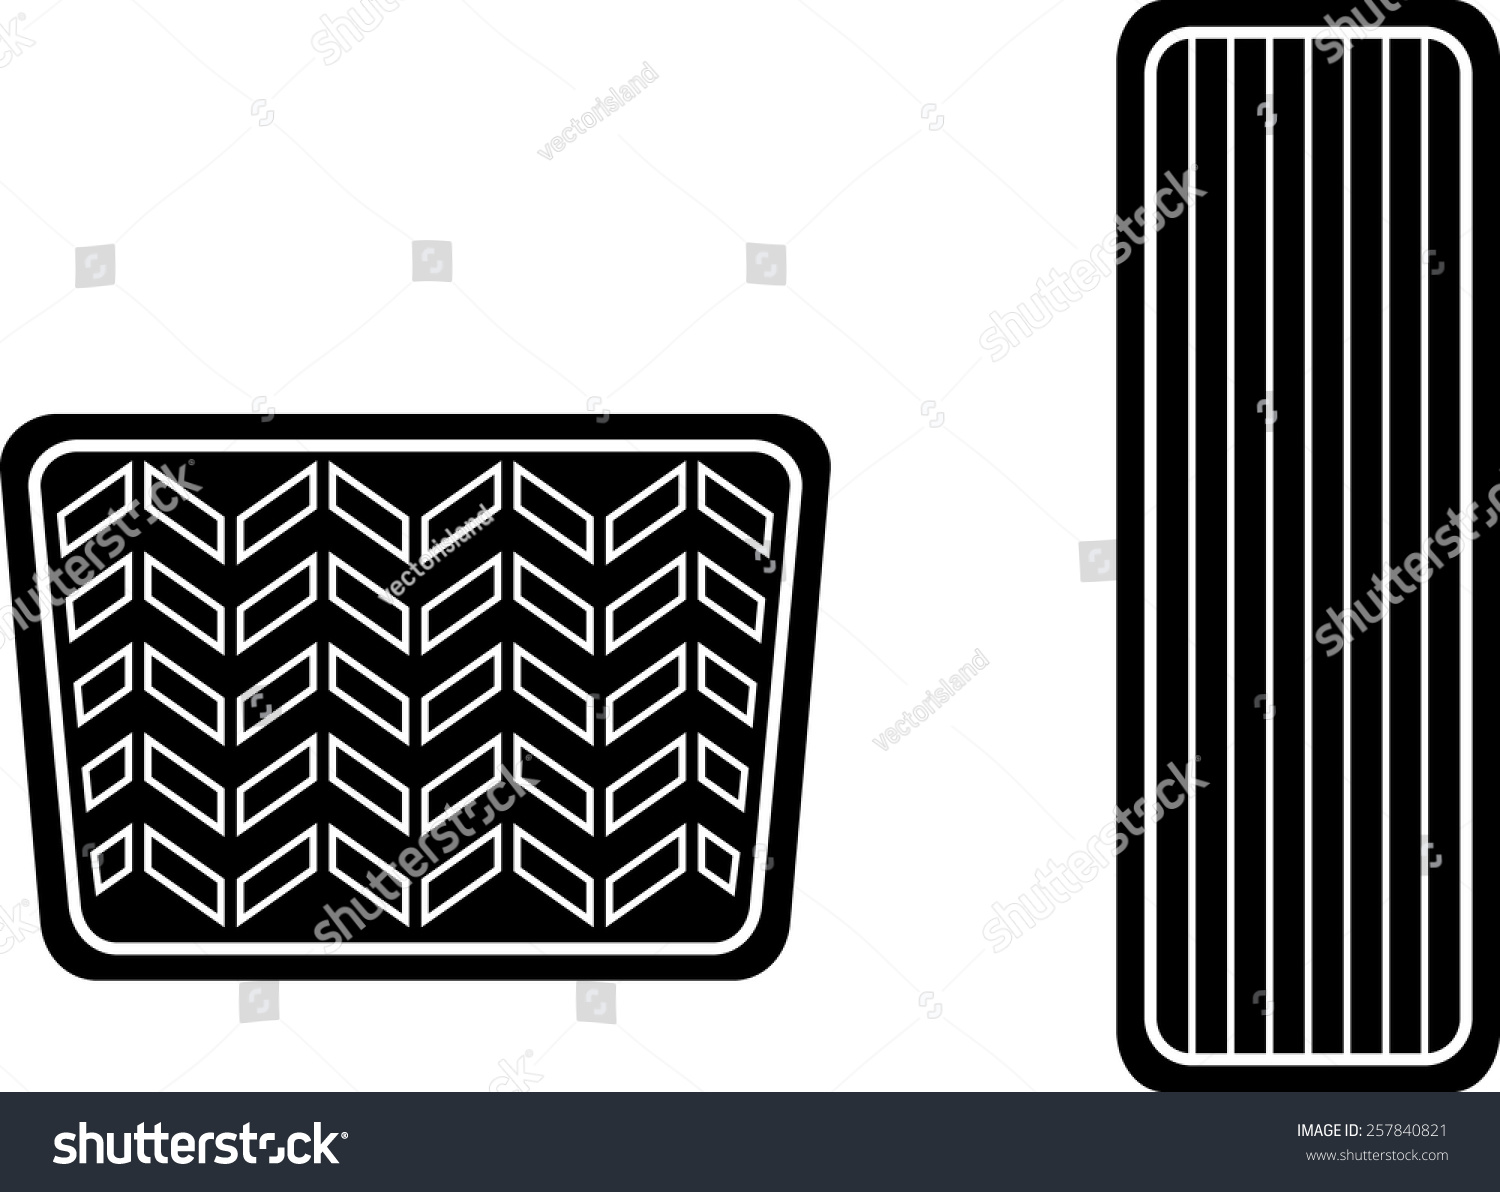 clipart of car brakes - photo #30